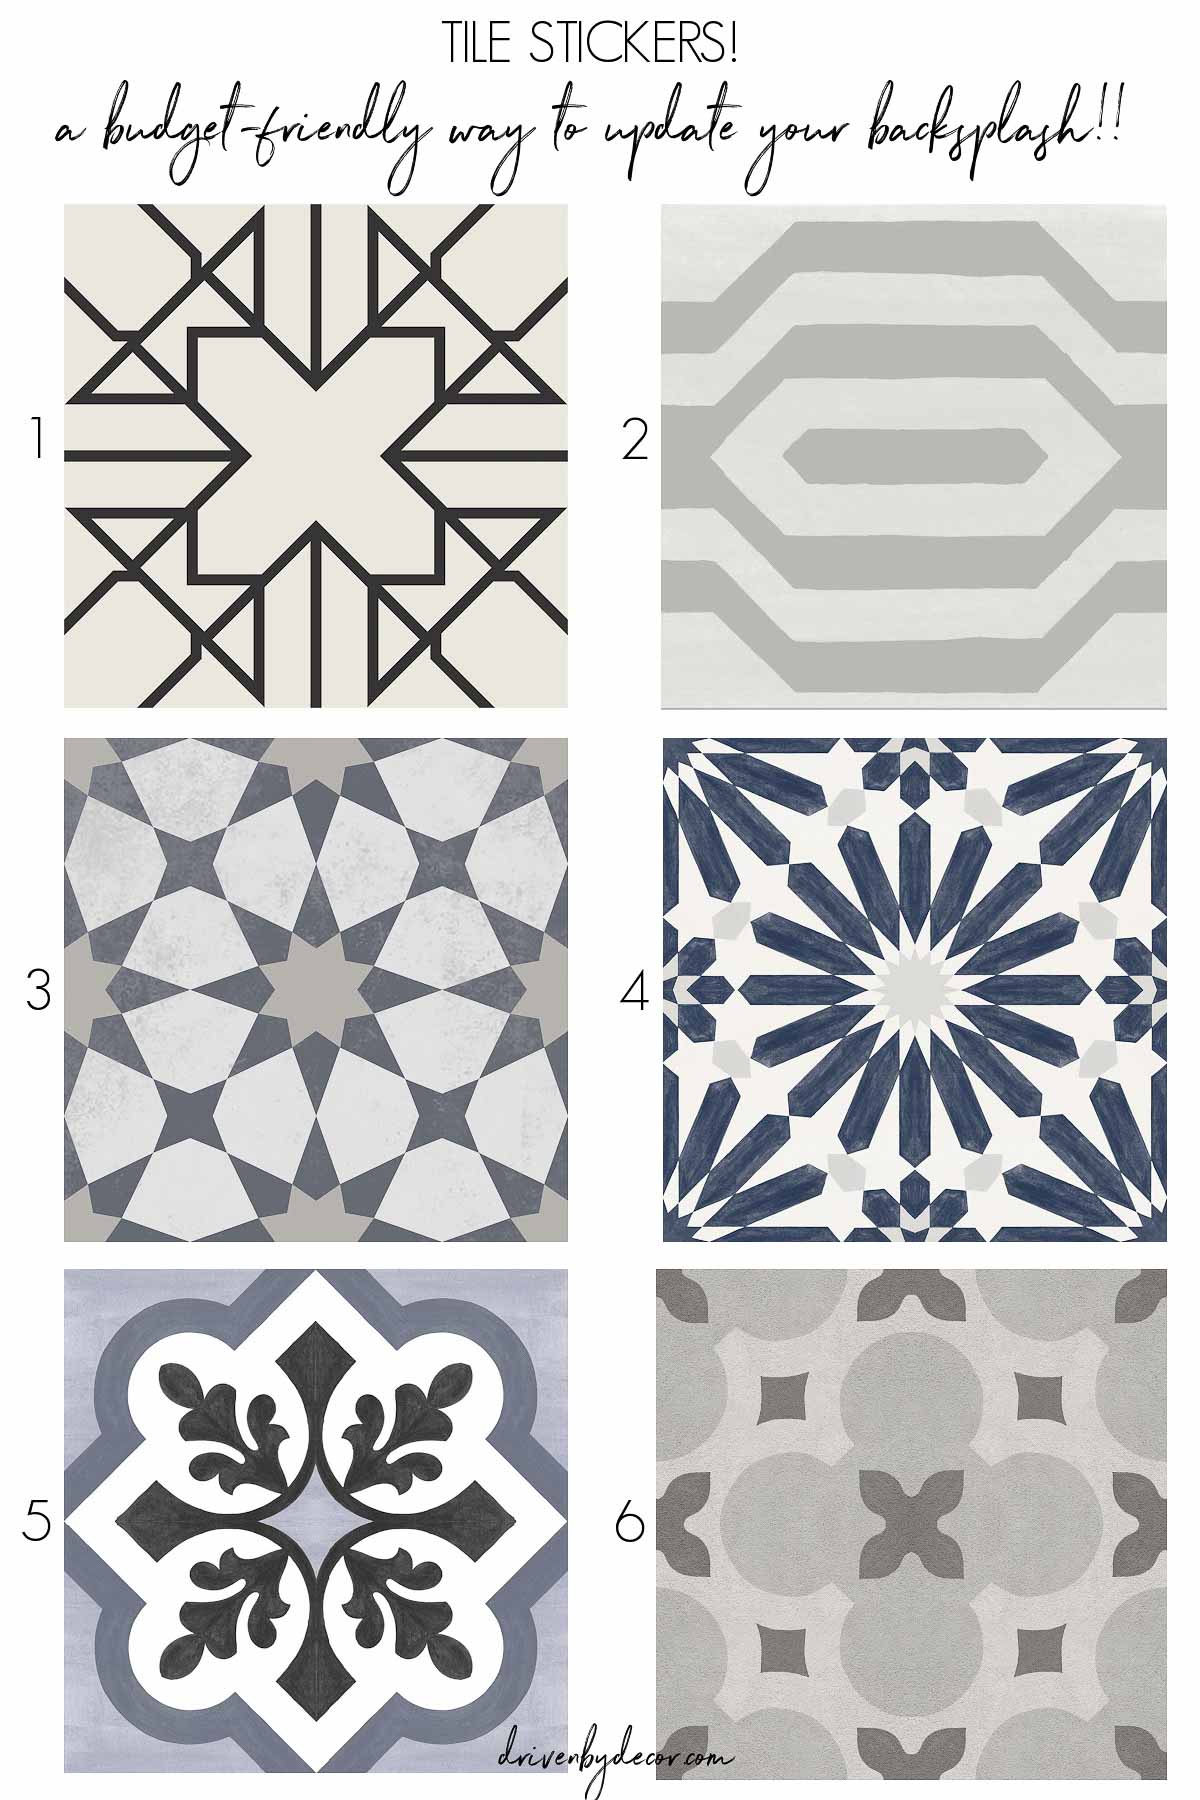 Tile stickers are perfect for a kitchen remodel on a budget!